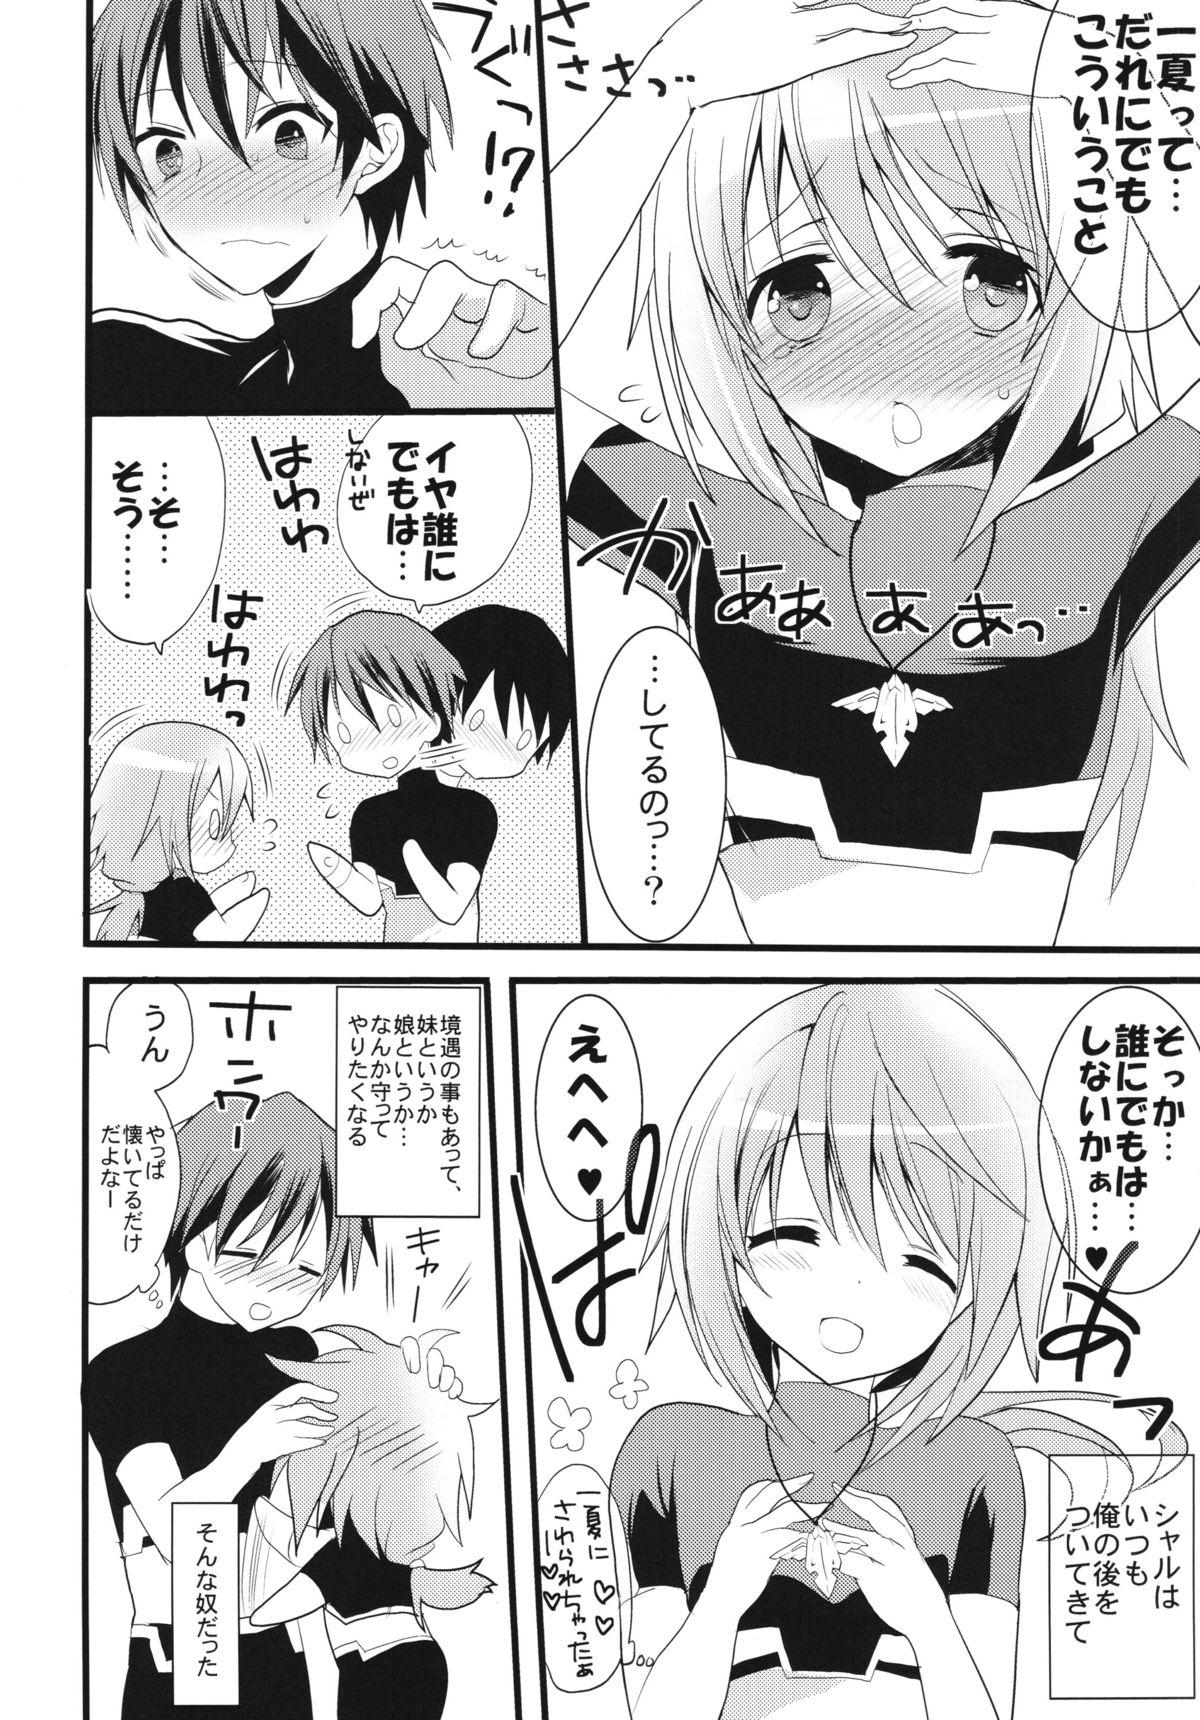 Real Infinite ☆ Seicross 2 - Infinite stratos Ass Lick - Page 14